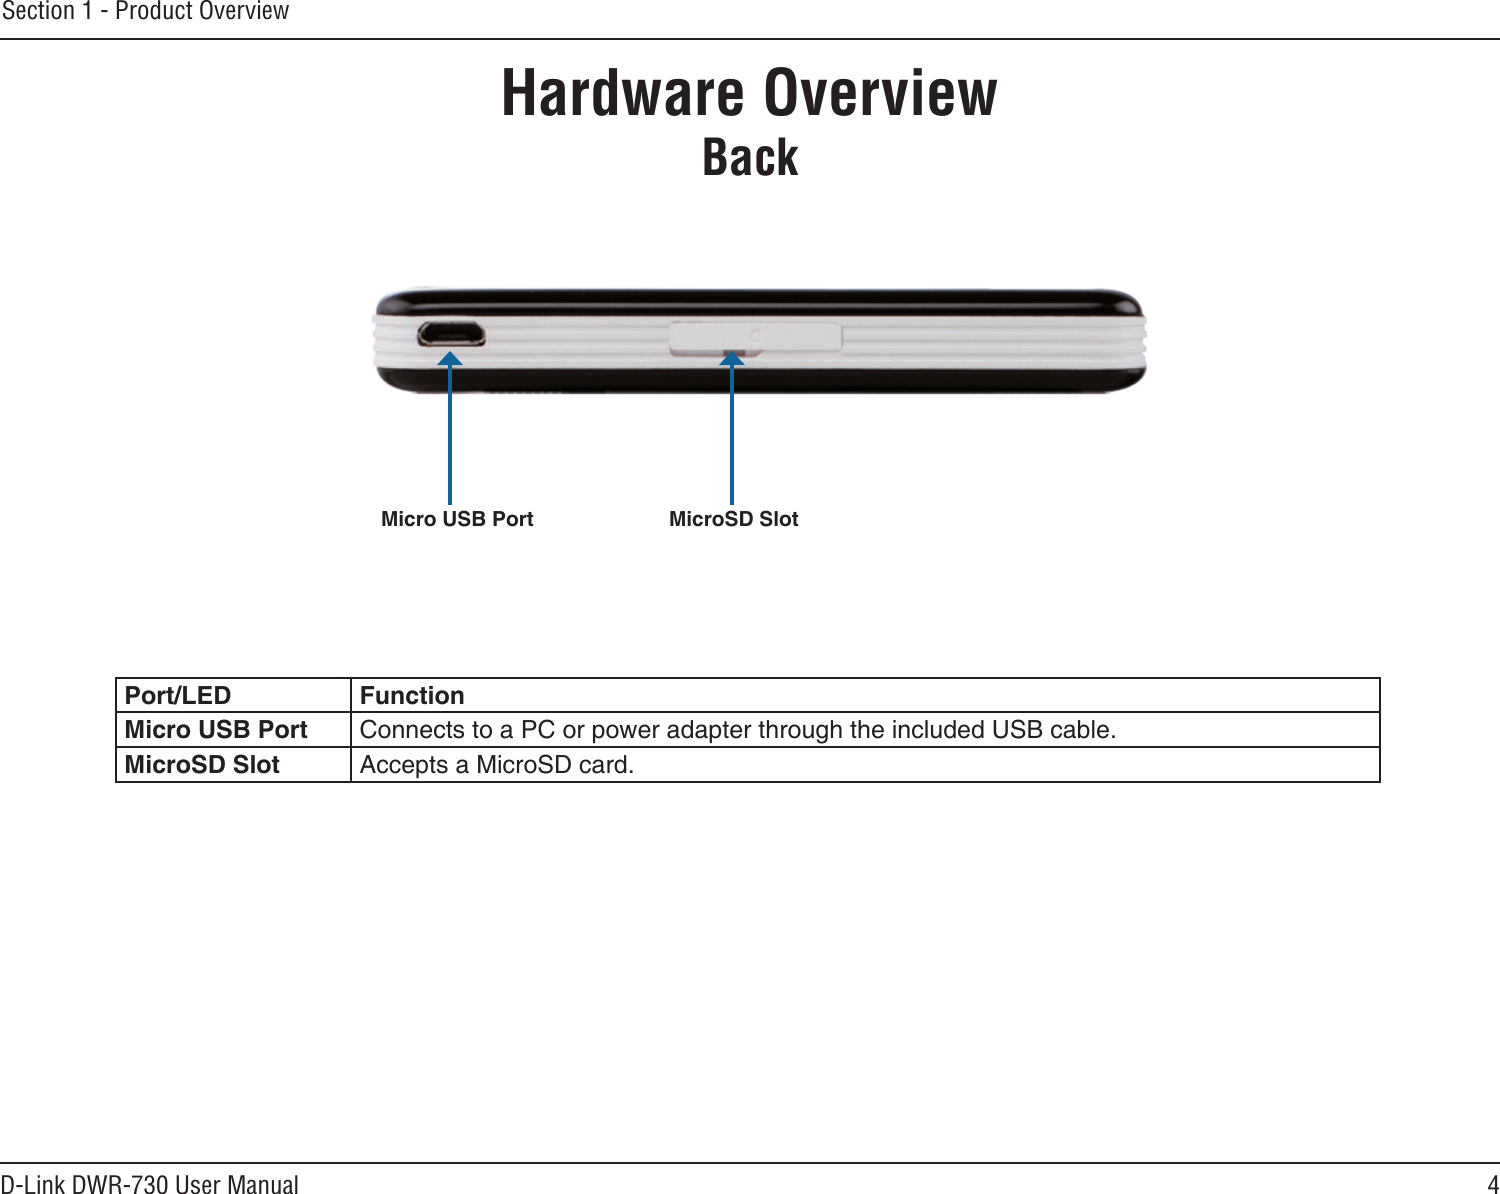 4D-Link DWR-730 User ManualSection 1 - Product OverviewHardware OverviewBack    